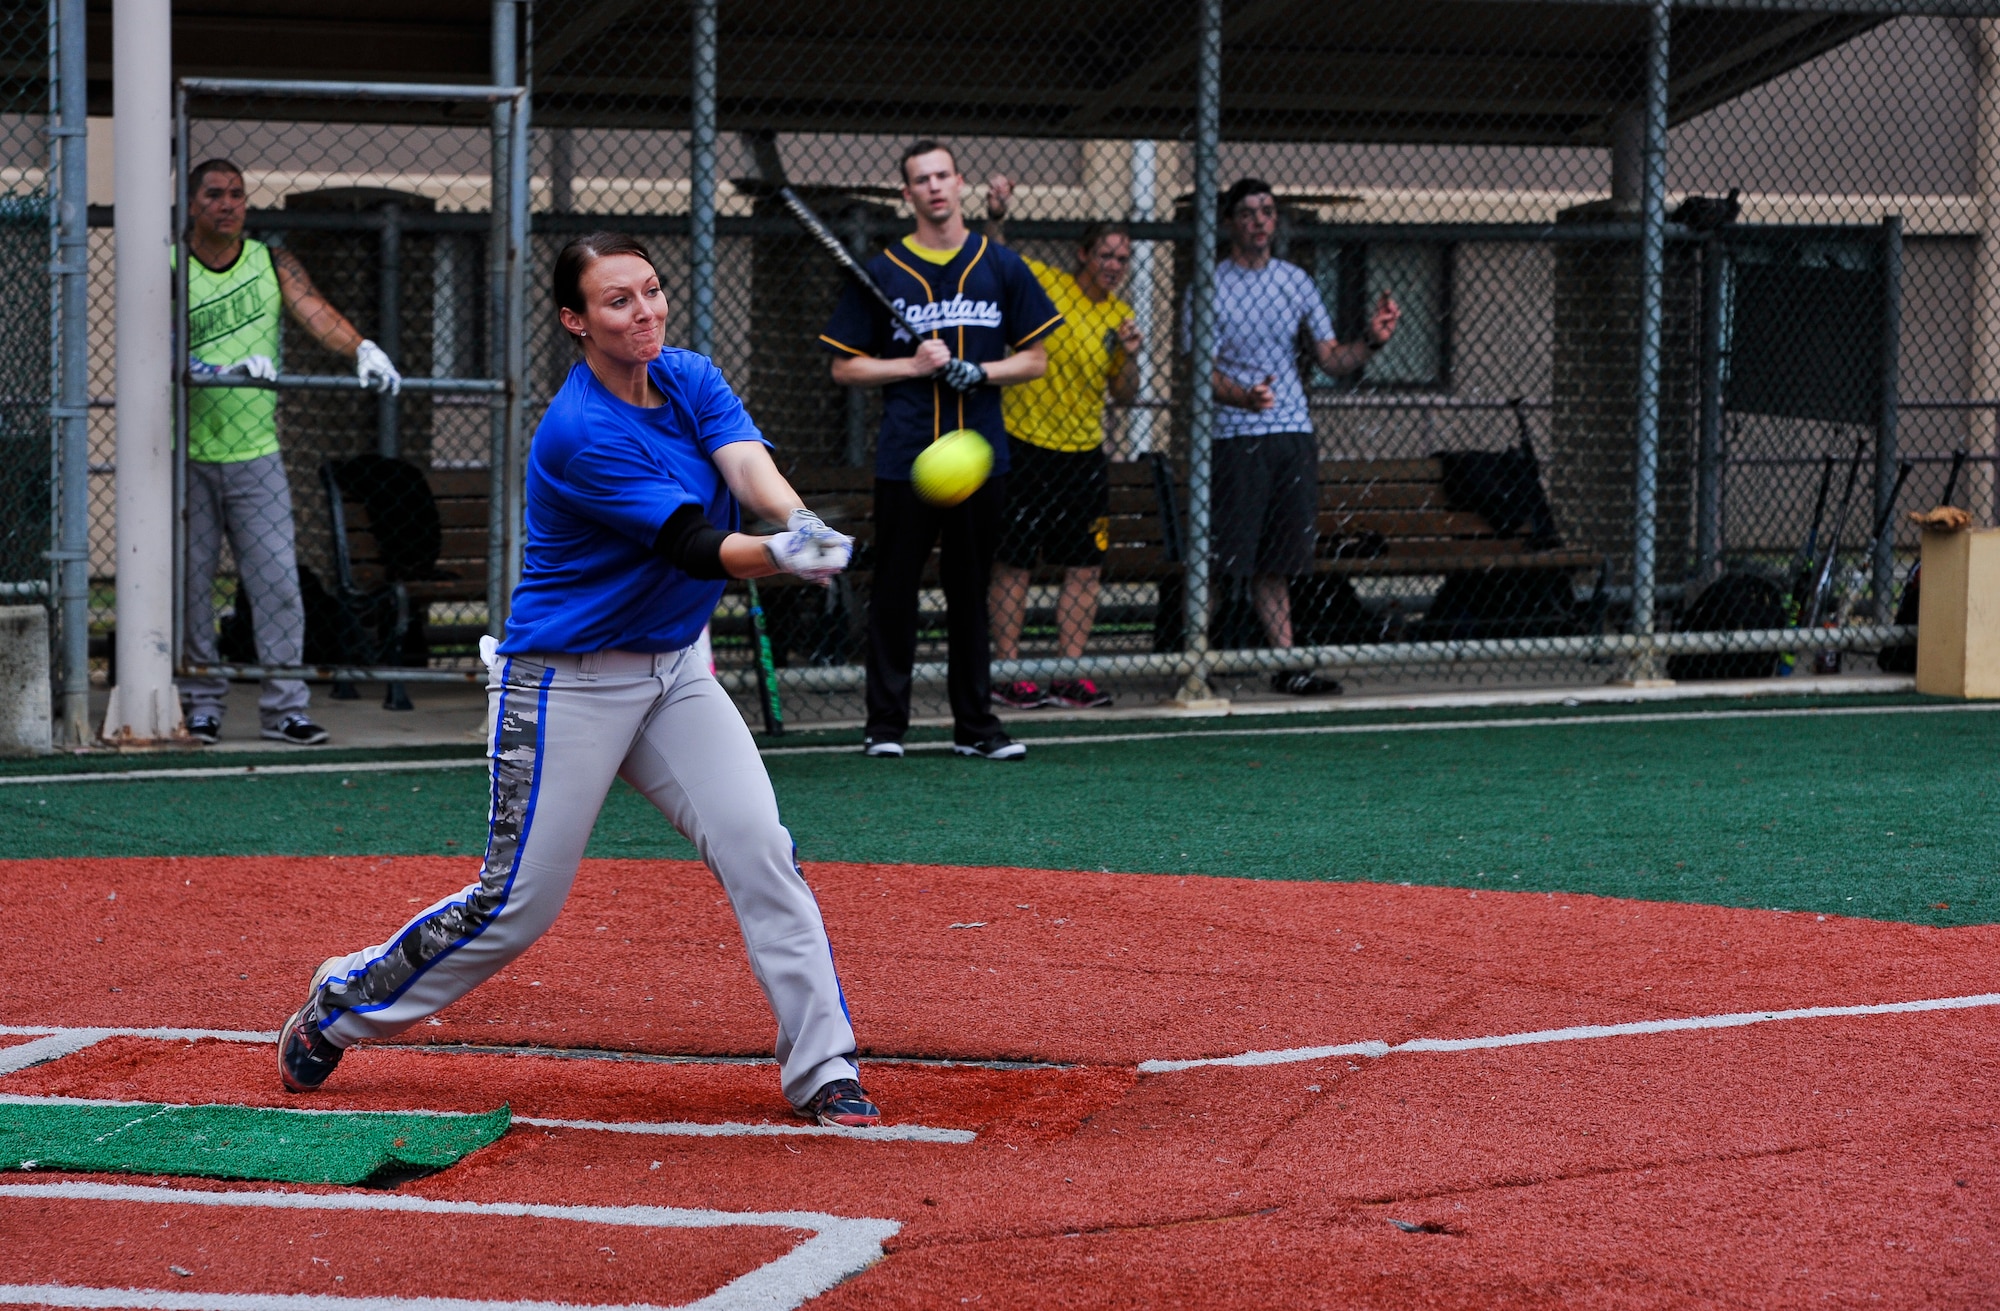 Senior Airman Amber Devlin, 694th Intelligence, Surveillance and Reconnaissance Group program manager, hits the ball into the outfield during the fifth inning of a softball game against the 3rd Battlefield Coordination Detachment Sept. 29, 2014, on Osan Air Base, Republic of Korea. Devlin was selected to be a part of the 15-player roster on the Air Force’s Women’s softball team. (U.S. Air Force photo by Senior Airman David Owsianka)